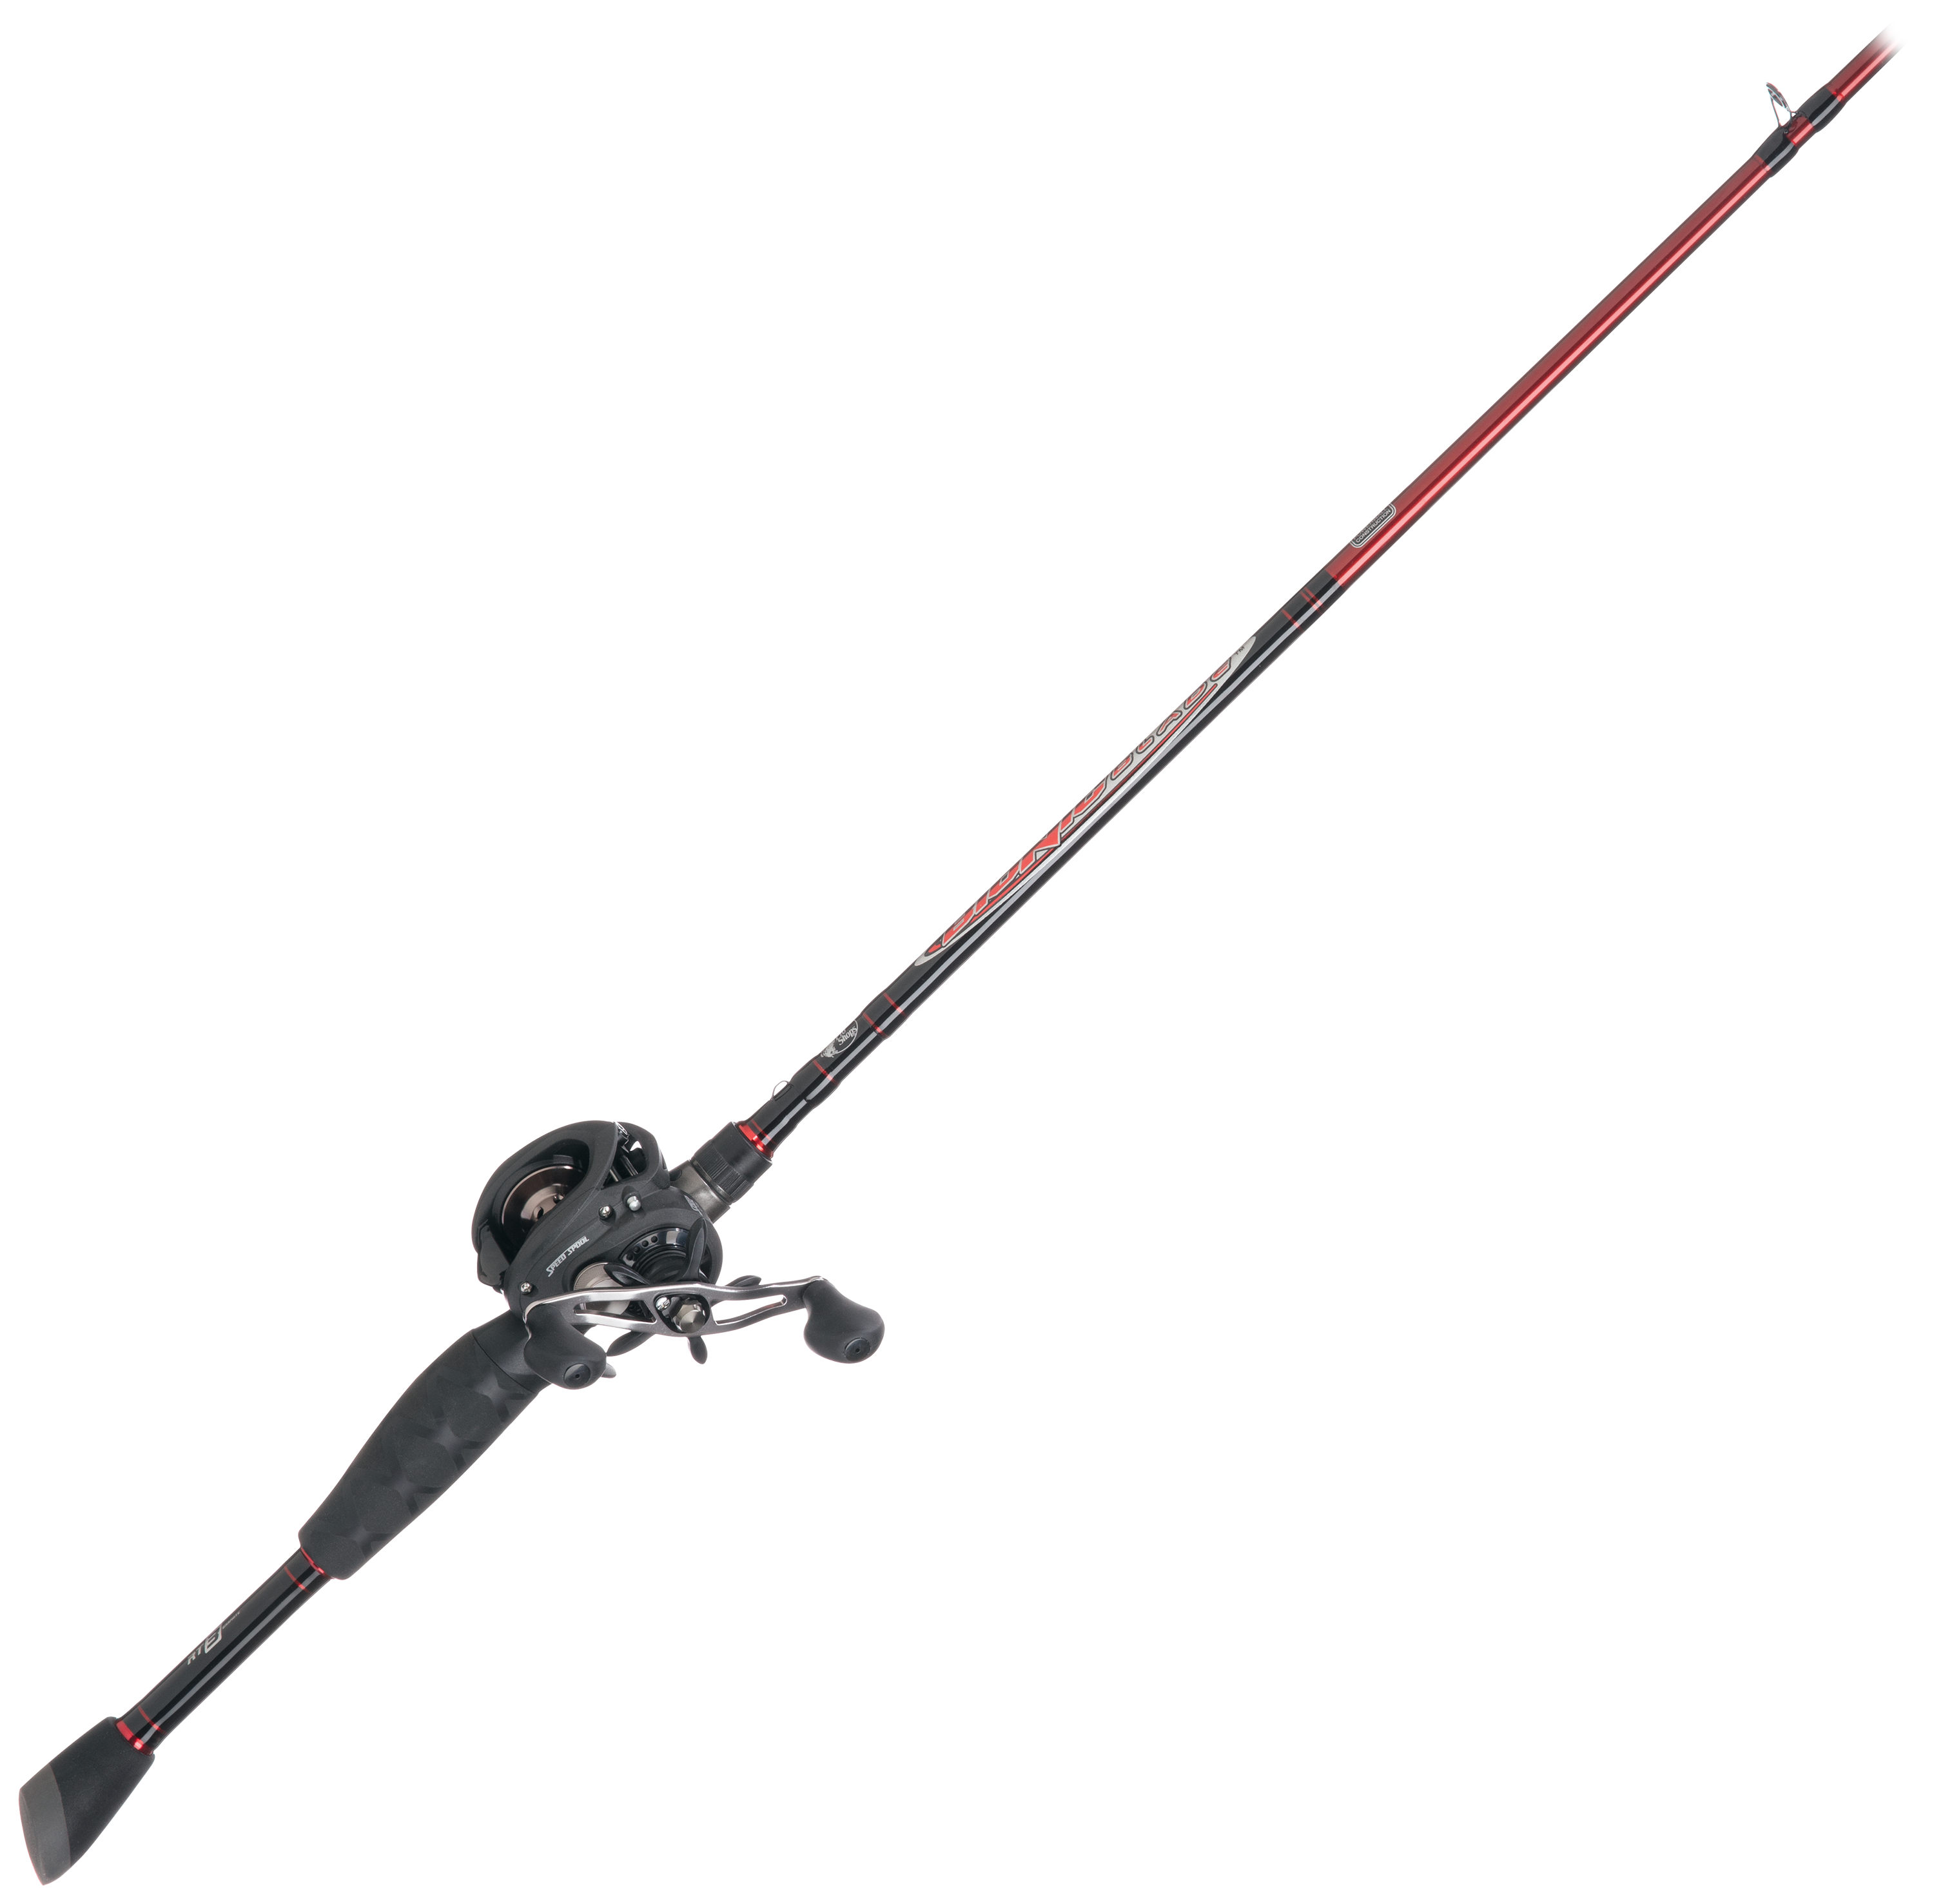 Lew's Speed Spool LFS/Bass Pro Shops XPS Bionic Blade Casting Rod and Reel Combo - Right - 7'3 - Medium Heavy - 7.5:1